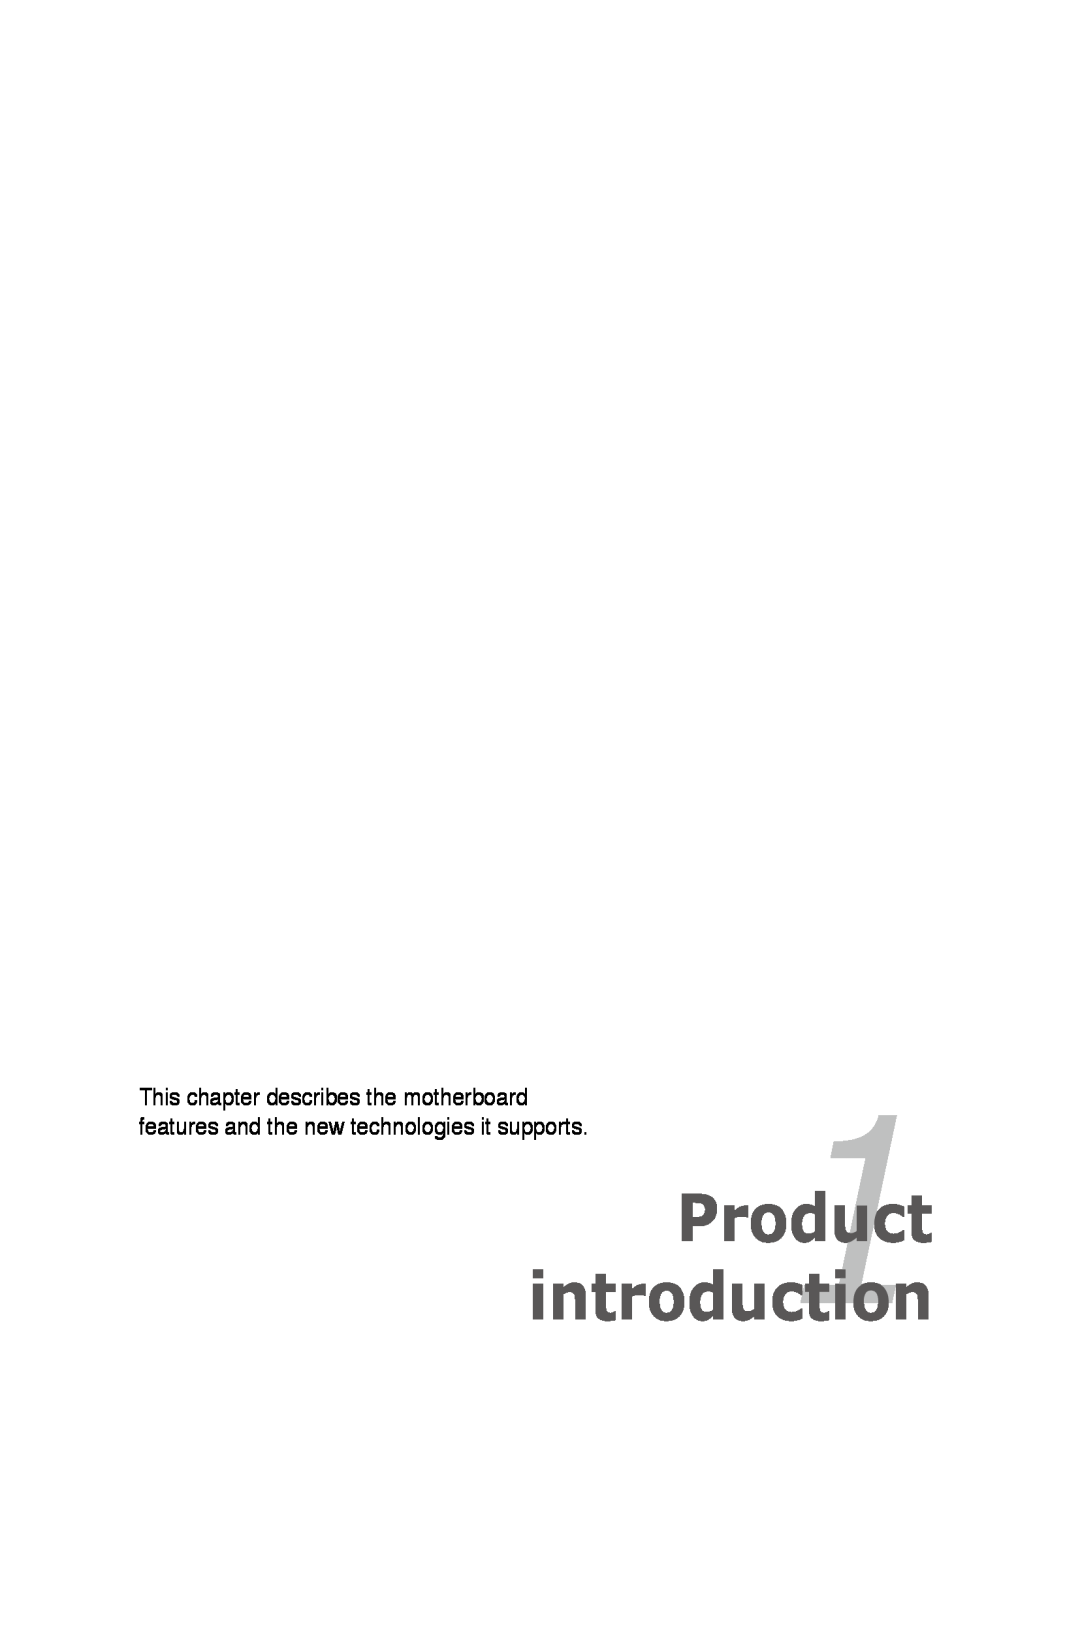 Asus Z7S WS manual Chapter, Product, introduction, This chapter describes the motherboard 